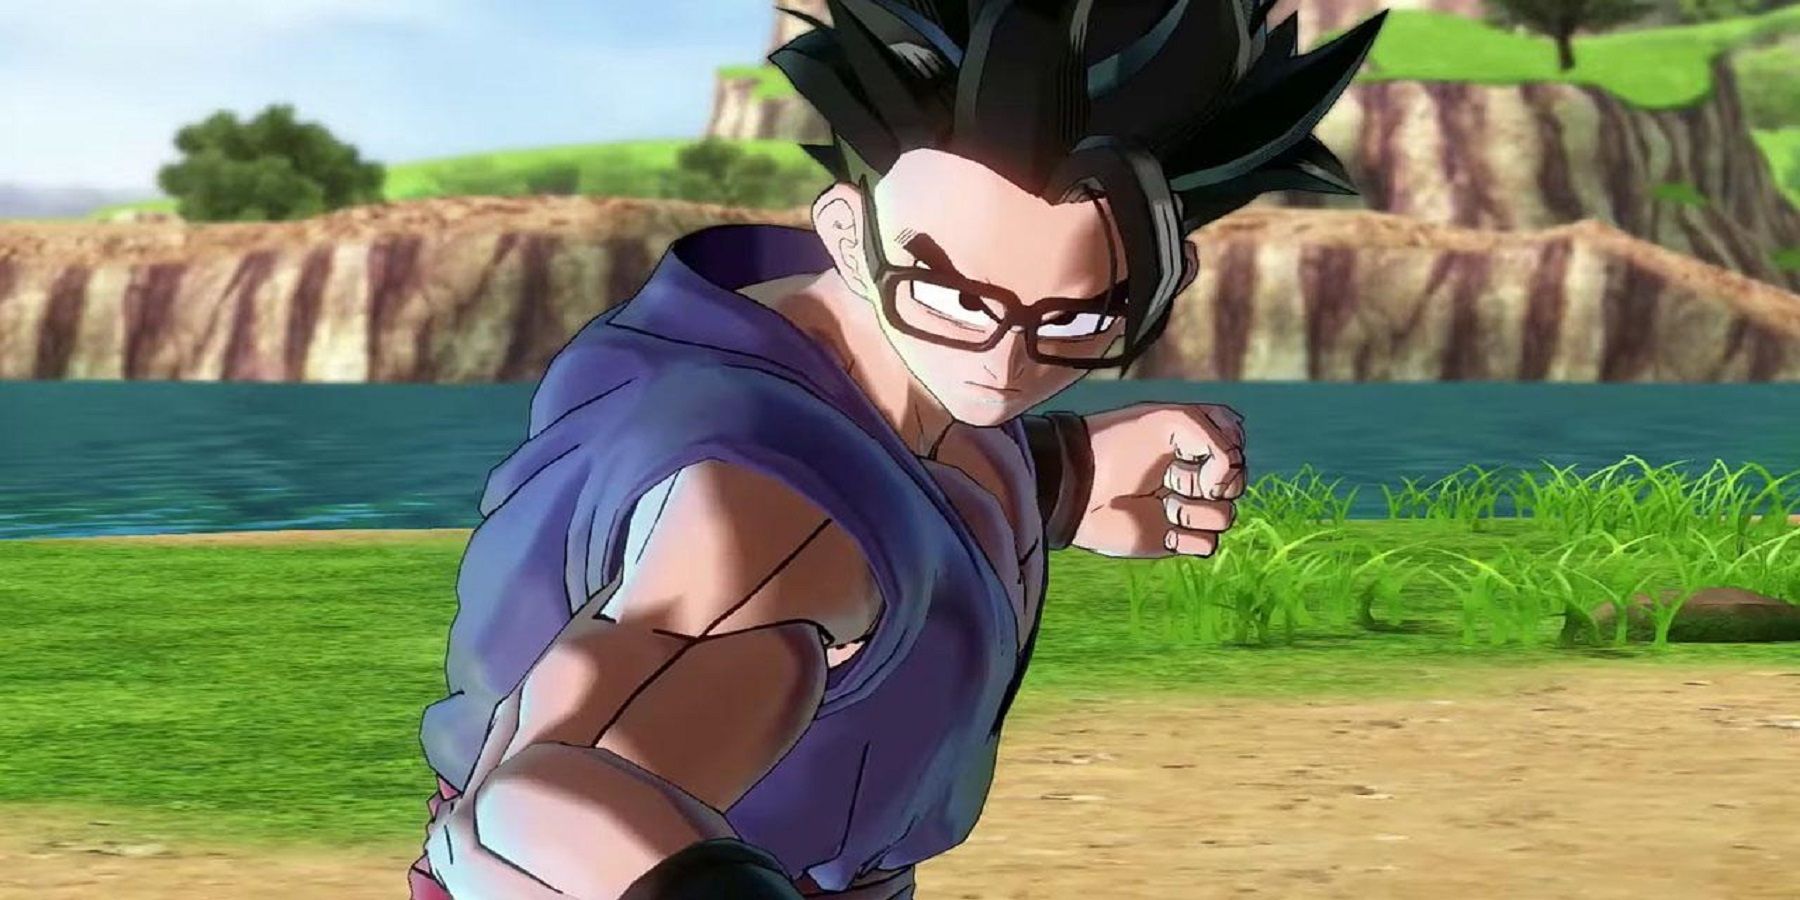 Dragon Ball Xenoverse 2's latest content pack, Hero of Justice Pack 1, channels Dragon Ball Super: Super Hero.